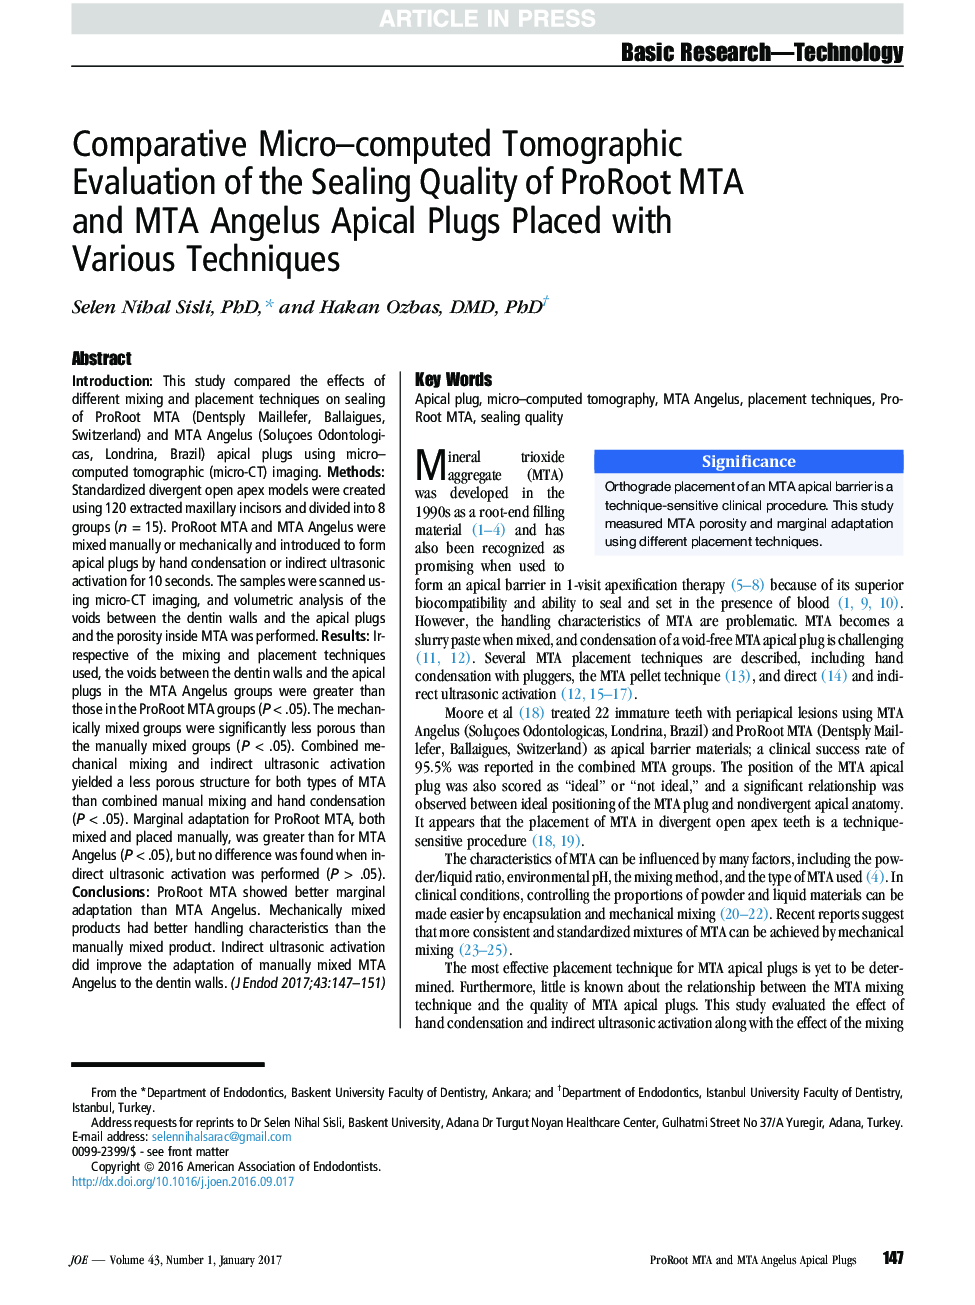 Comparative Micro-computed Tomographic Evaluation of the Sealing Quality of ProRoot MTA and MTA Angelus Apical Plugs Placed with Various Techniques